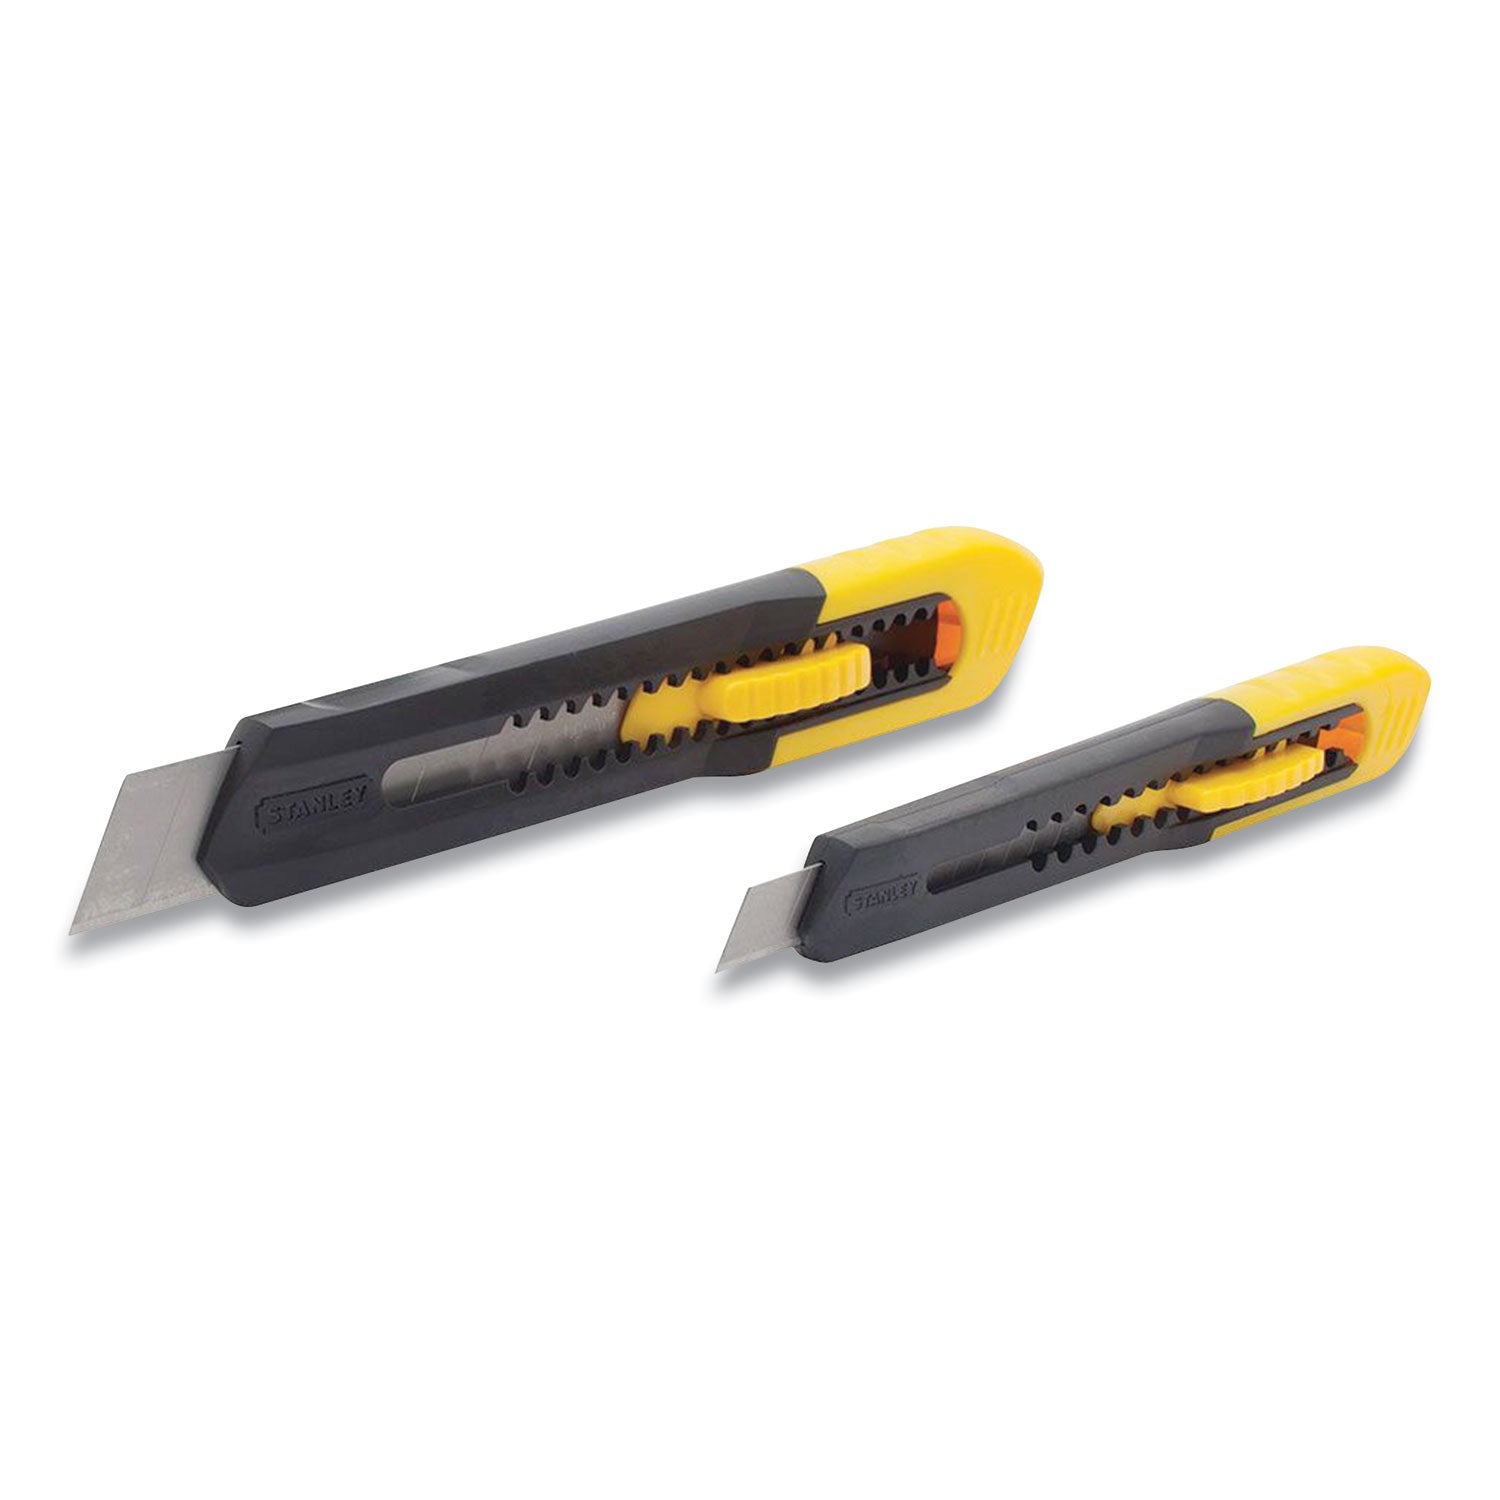 two-pack-quick-point-snap-off-blade-utility-knife-9-mm-and-18-mm-blades-yellow-black_bosbos10202 - 1